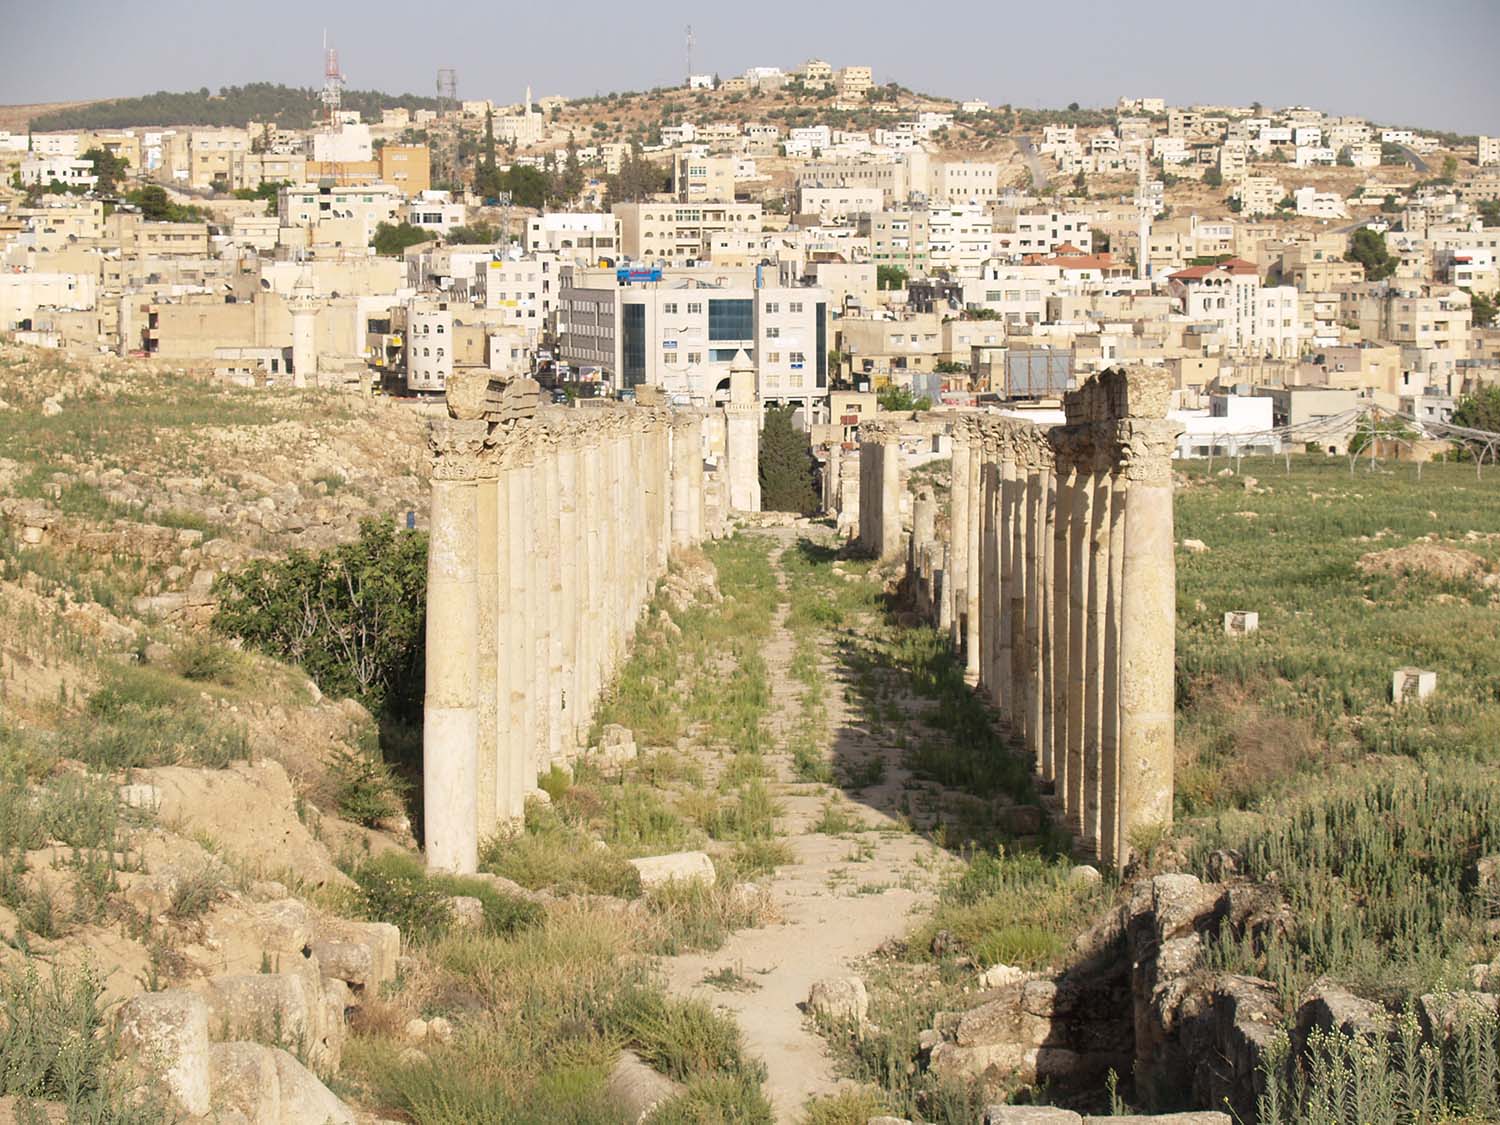 Eastward view of South Decumanus; Al-Hashimi Mosque and modern Jerash in background